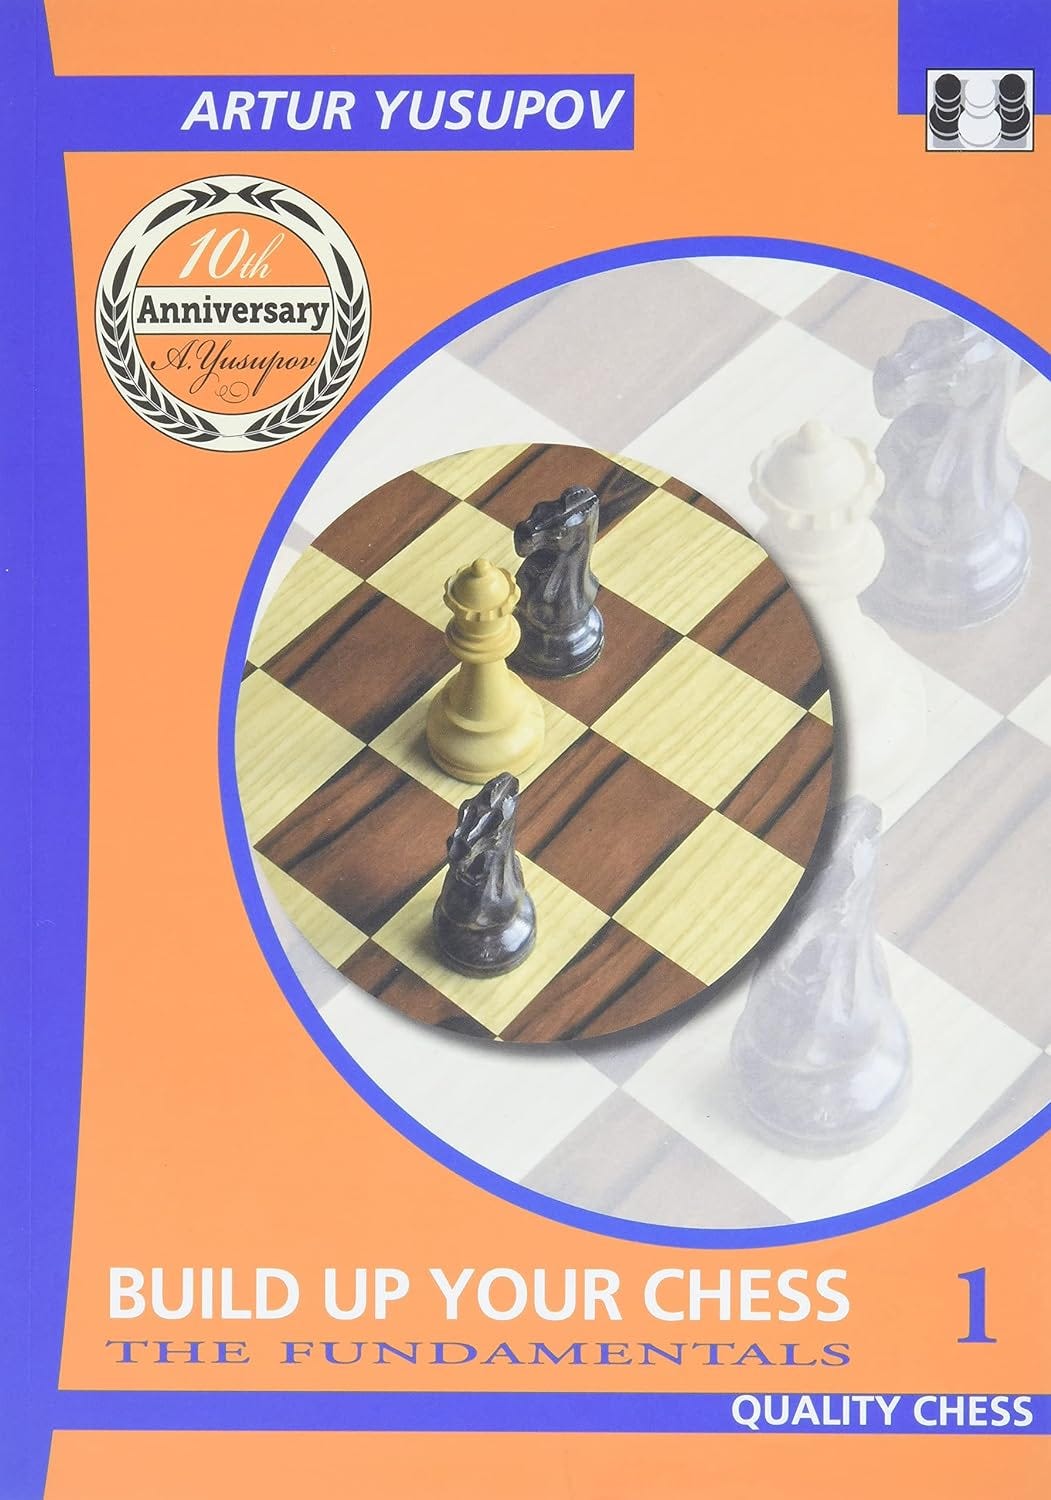 Top 50 tips of 2700+ players on chess improvement (Part 2) - Habits of Chess  Success